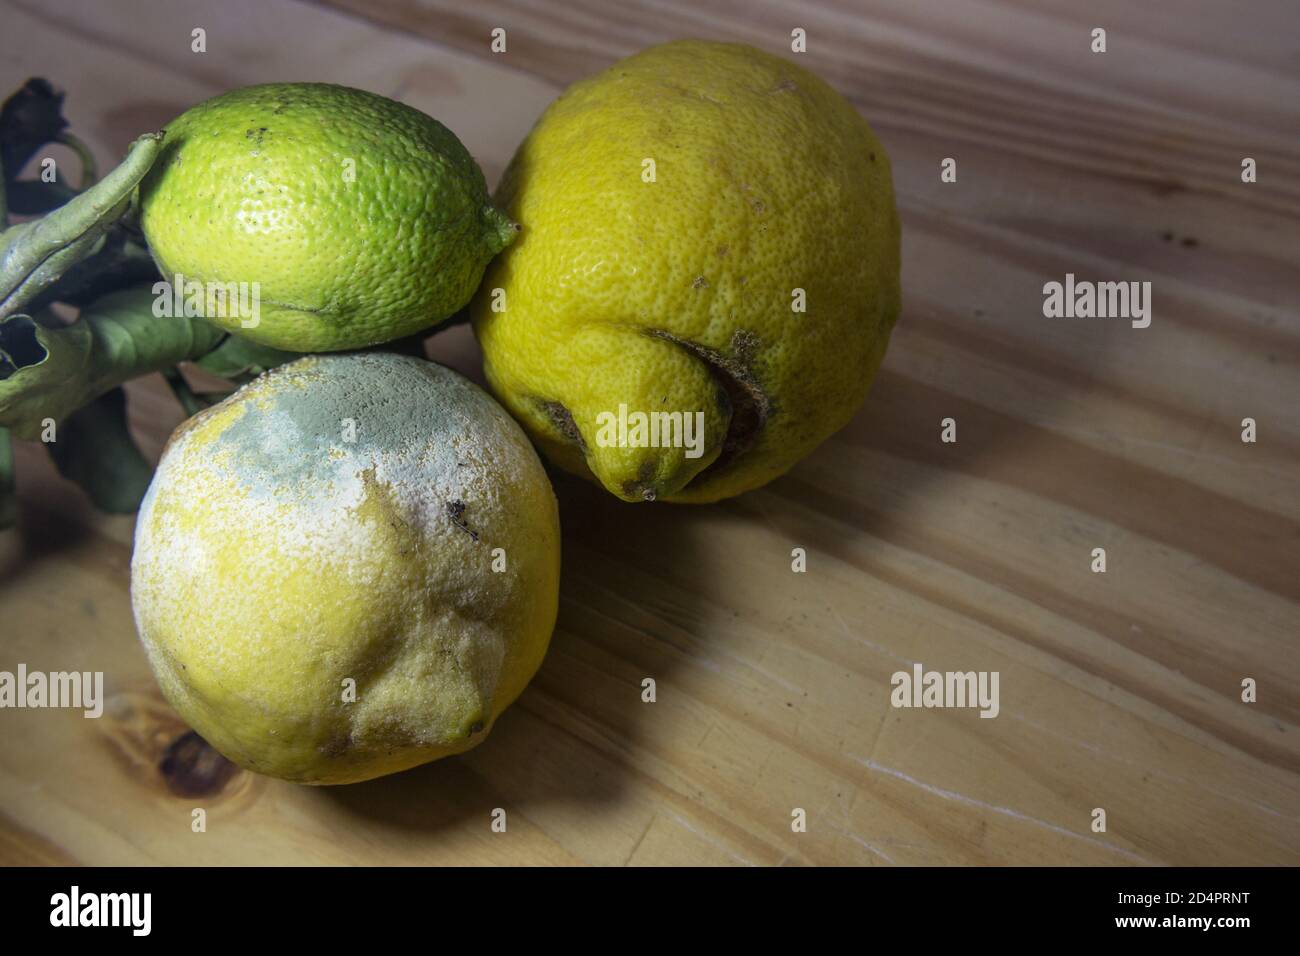 Group of three lemons, one of which is covered with mold Stock Photo